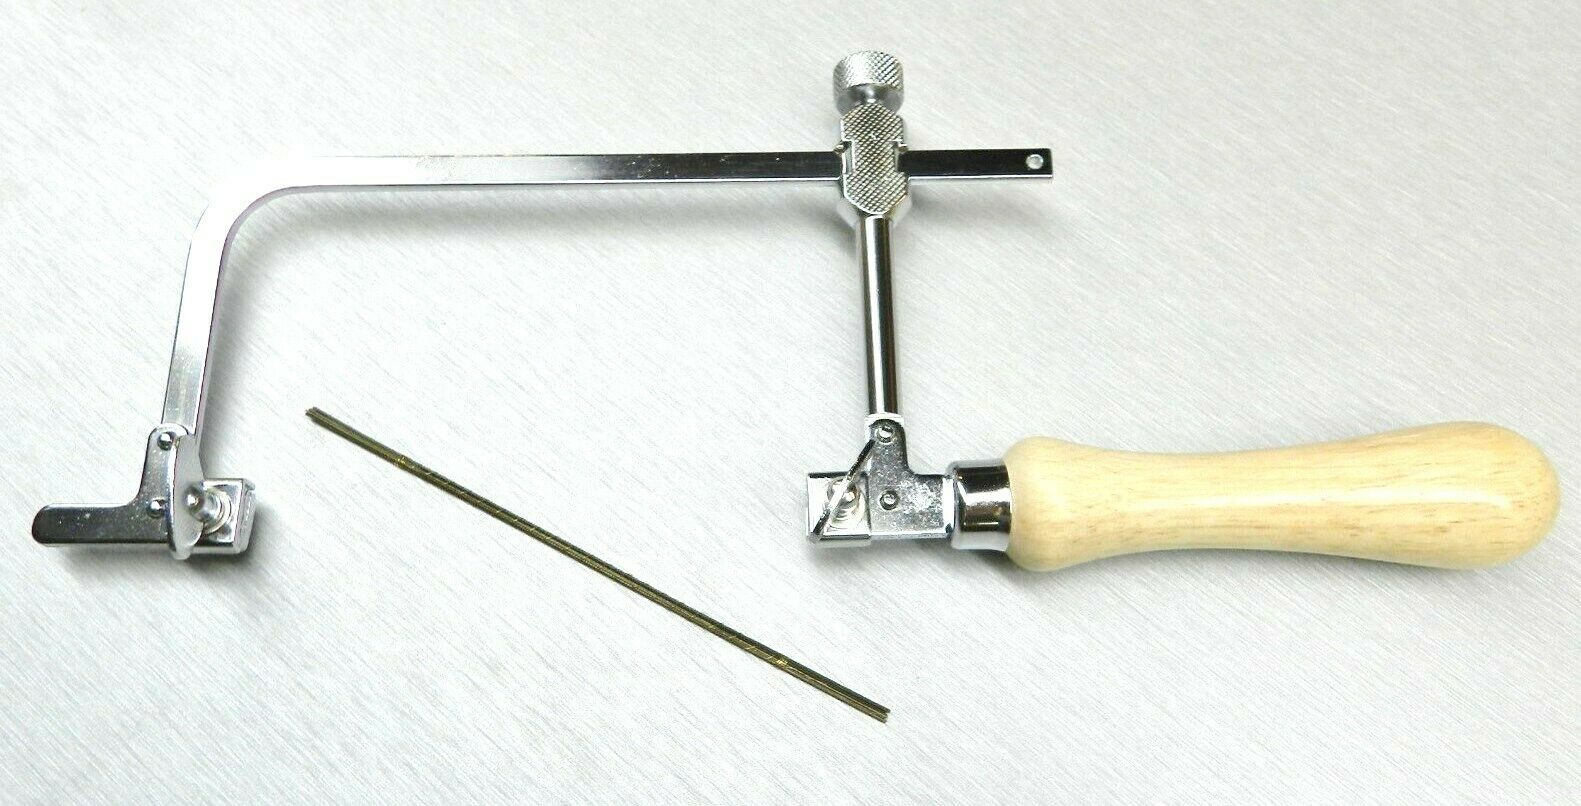 Jewelers Saw Frame Adjustable 2-3/4" + 12 Pieces #2 Blades Jewelry Making Crafts